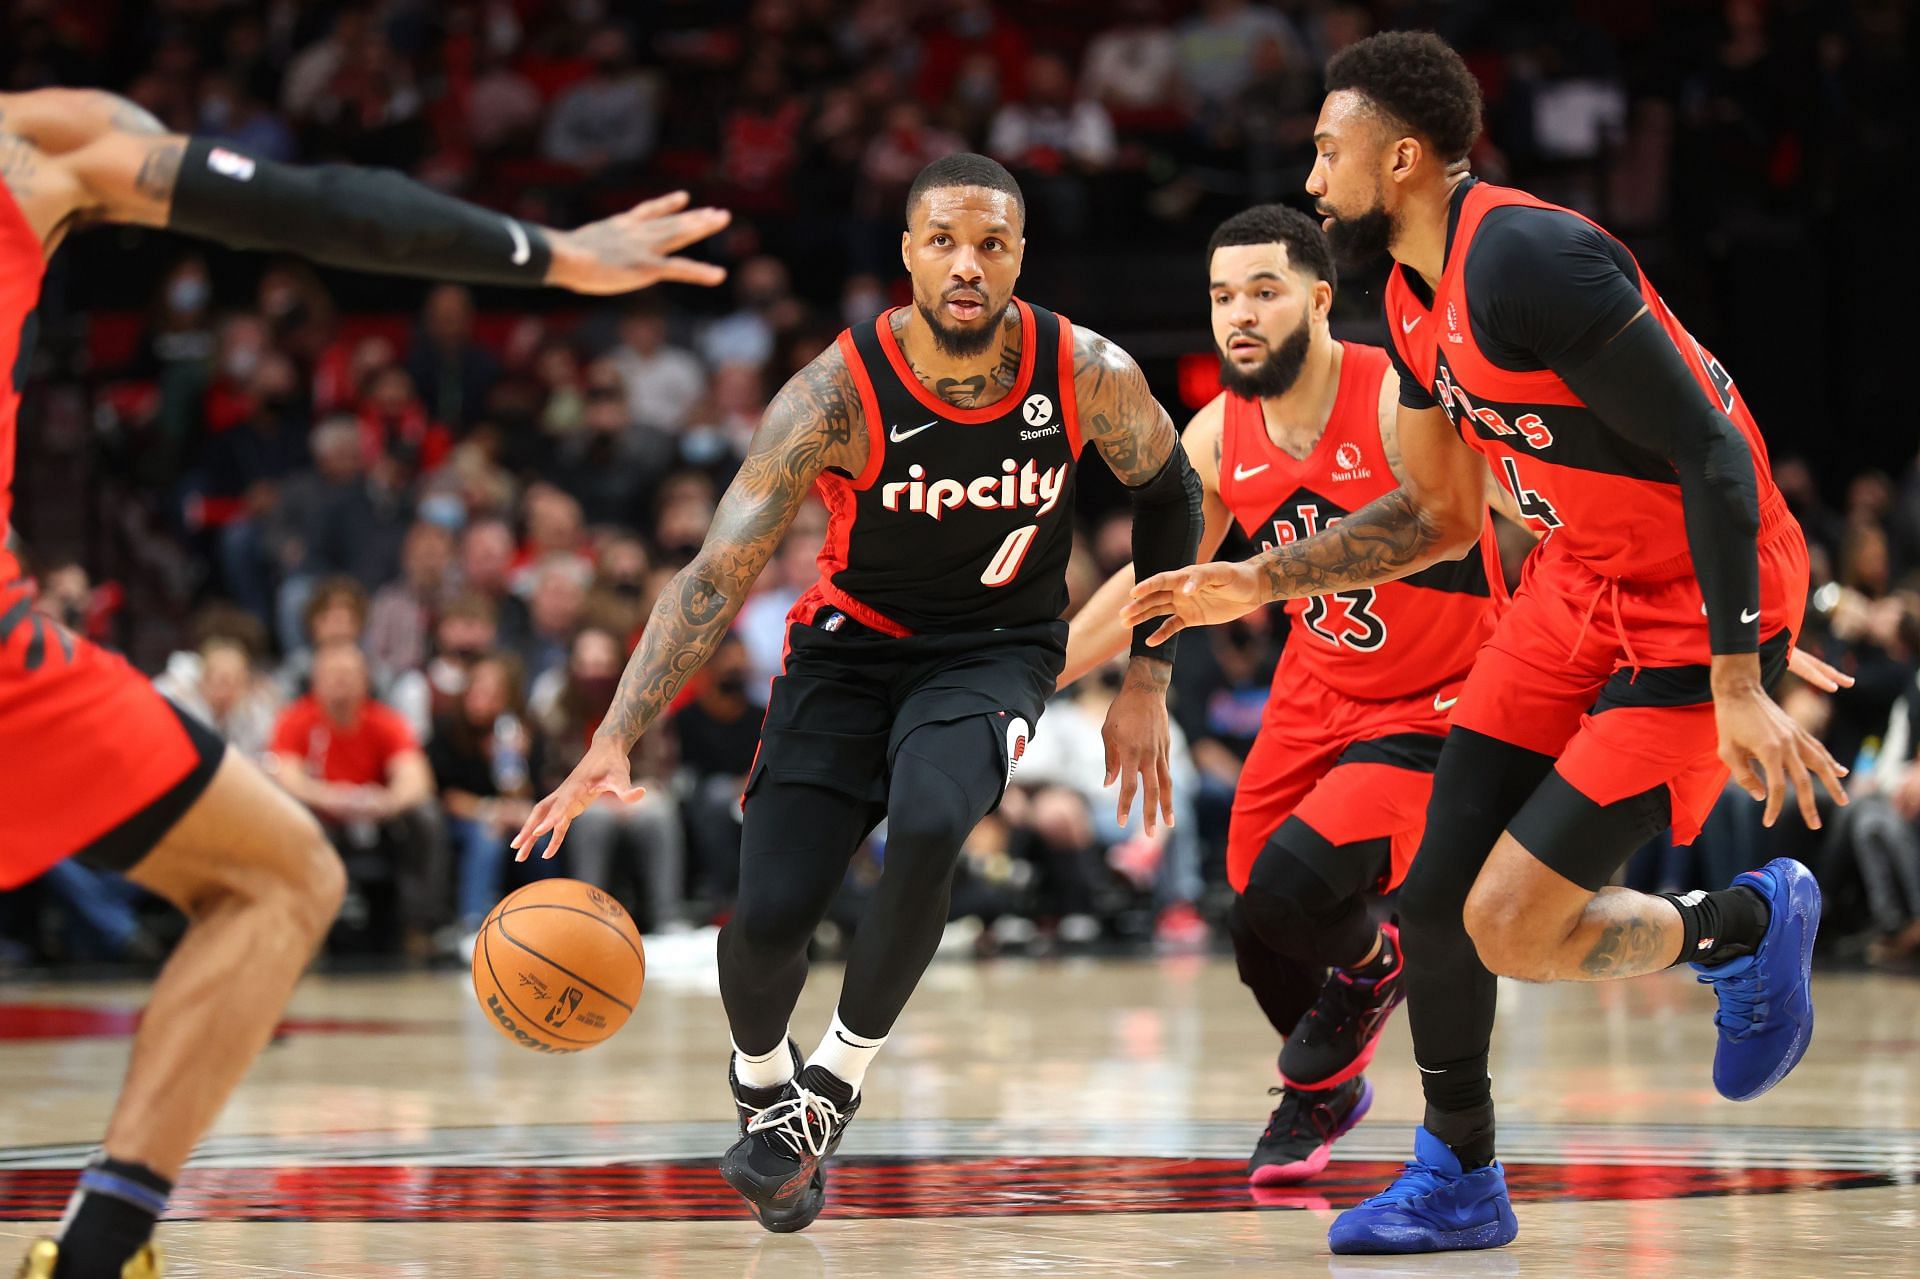 Damian Lillard #0 of the Portland Trail Blazers drives up court against the Toronto Raptors in the first quarter at Moda Center on November 15, 2021 in Portland, Oregon.